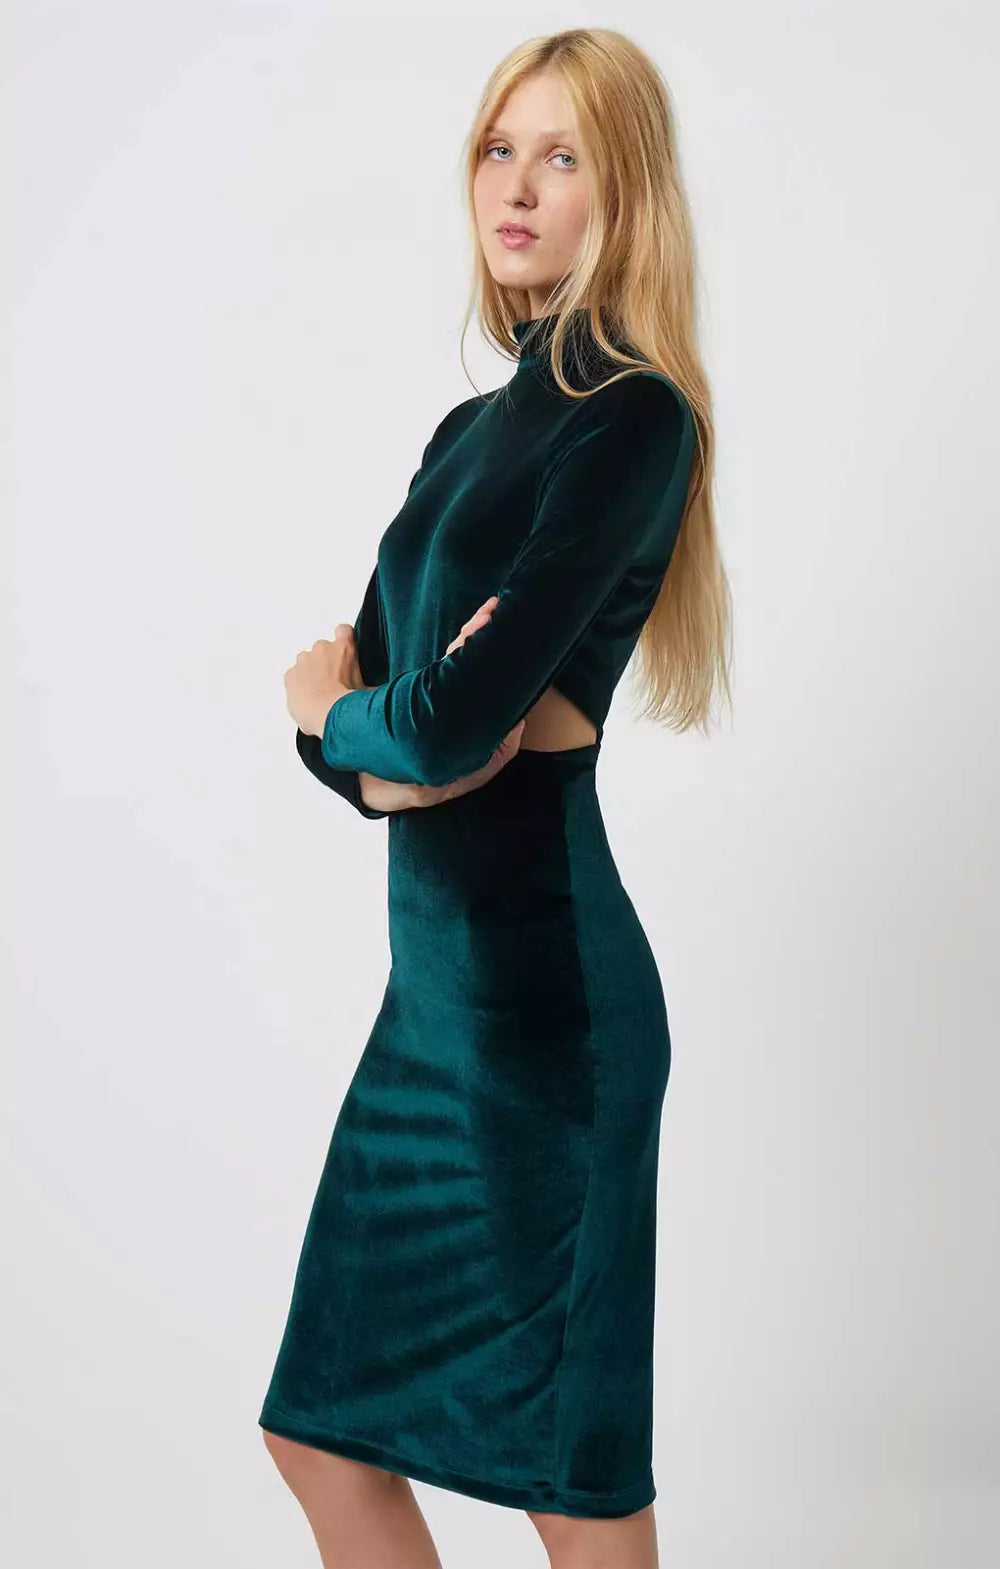 French Connection Sula Velvet Jersey Dress product image